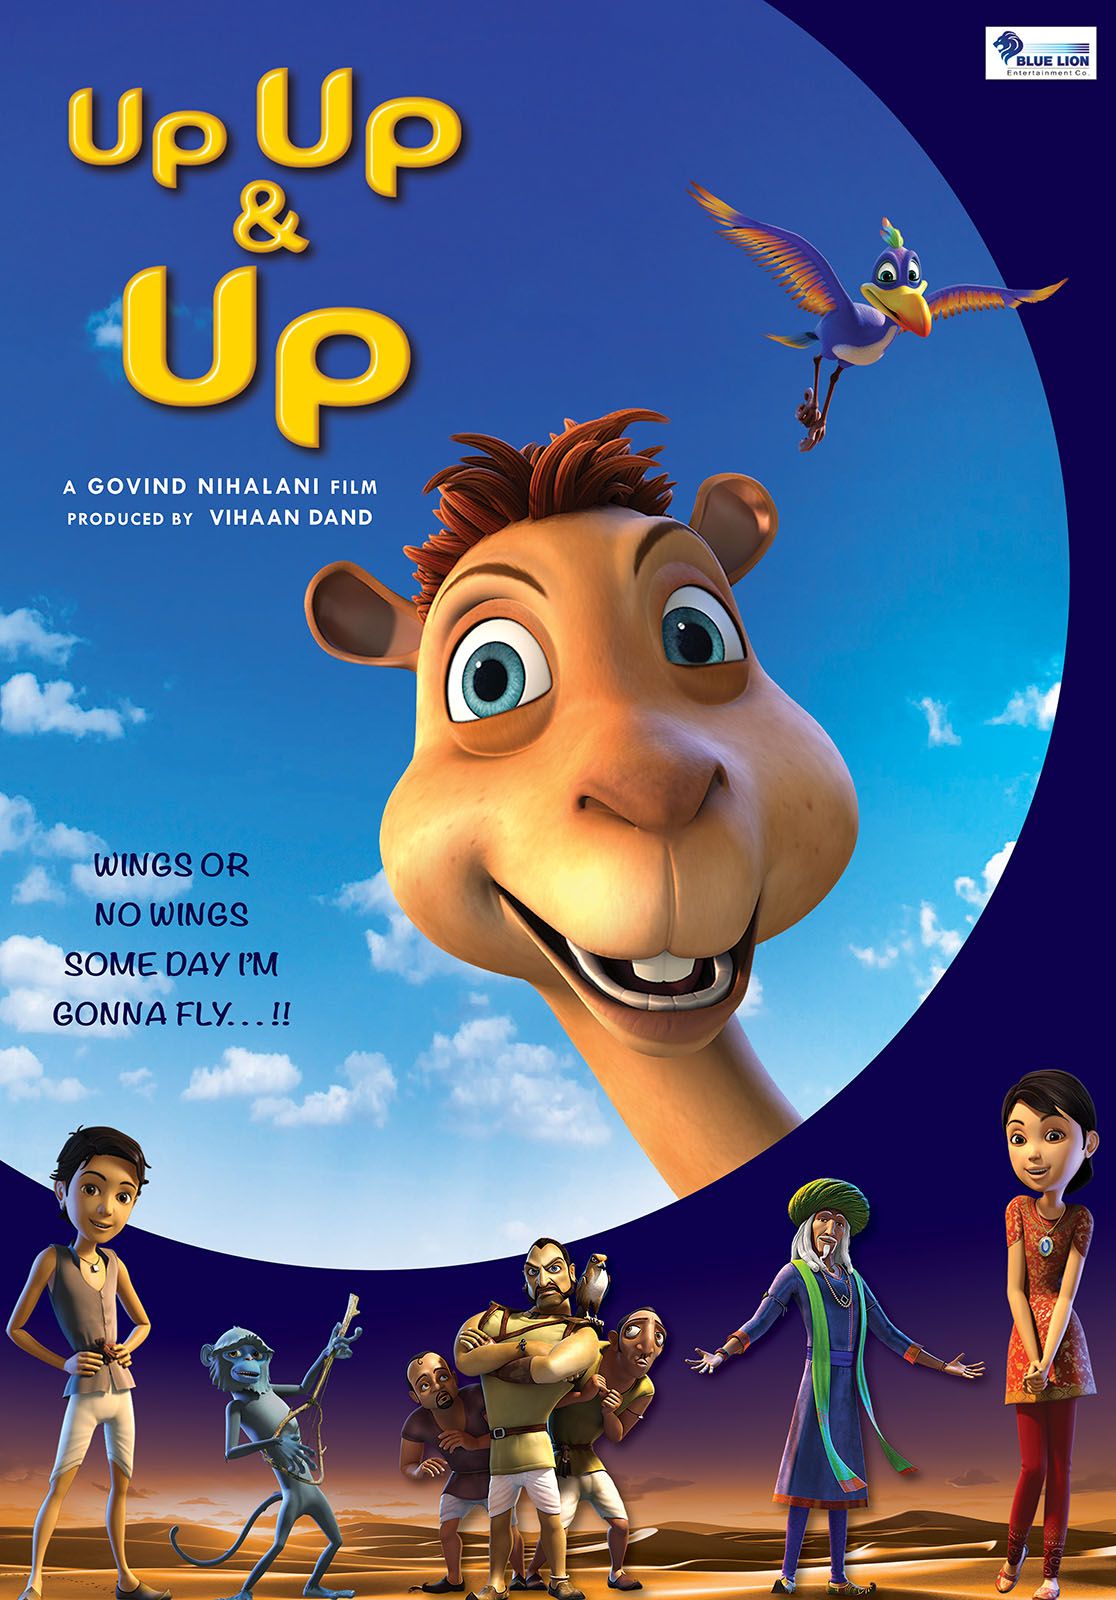 Up Up and Up (2019) Hindi Dubbed Full Movie